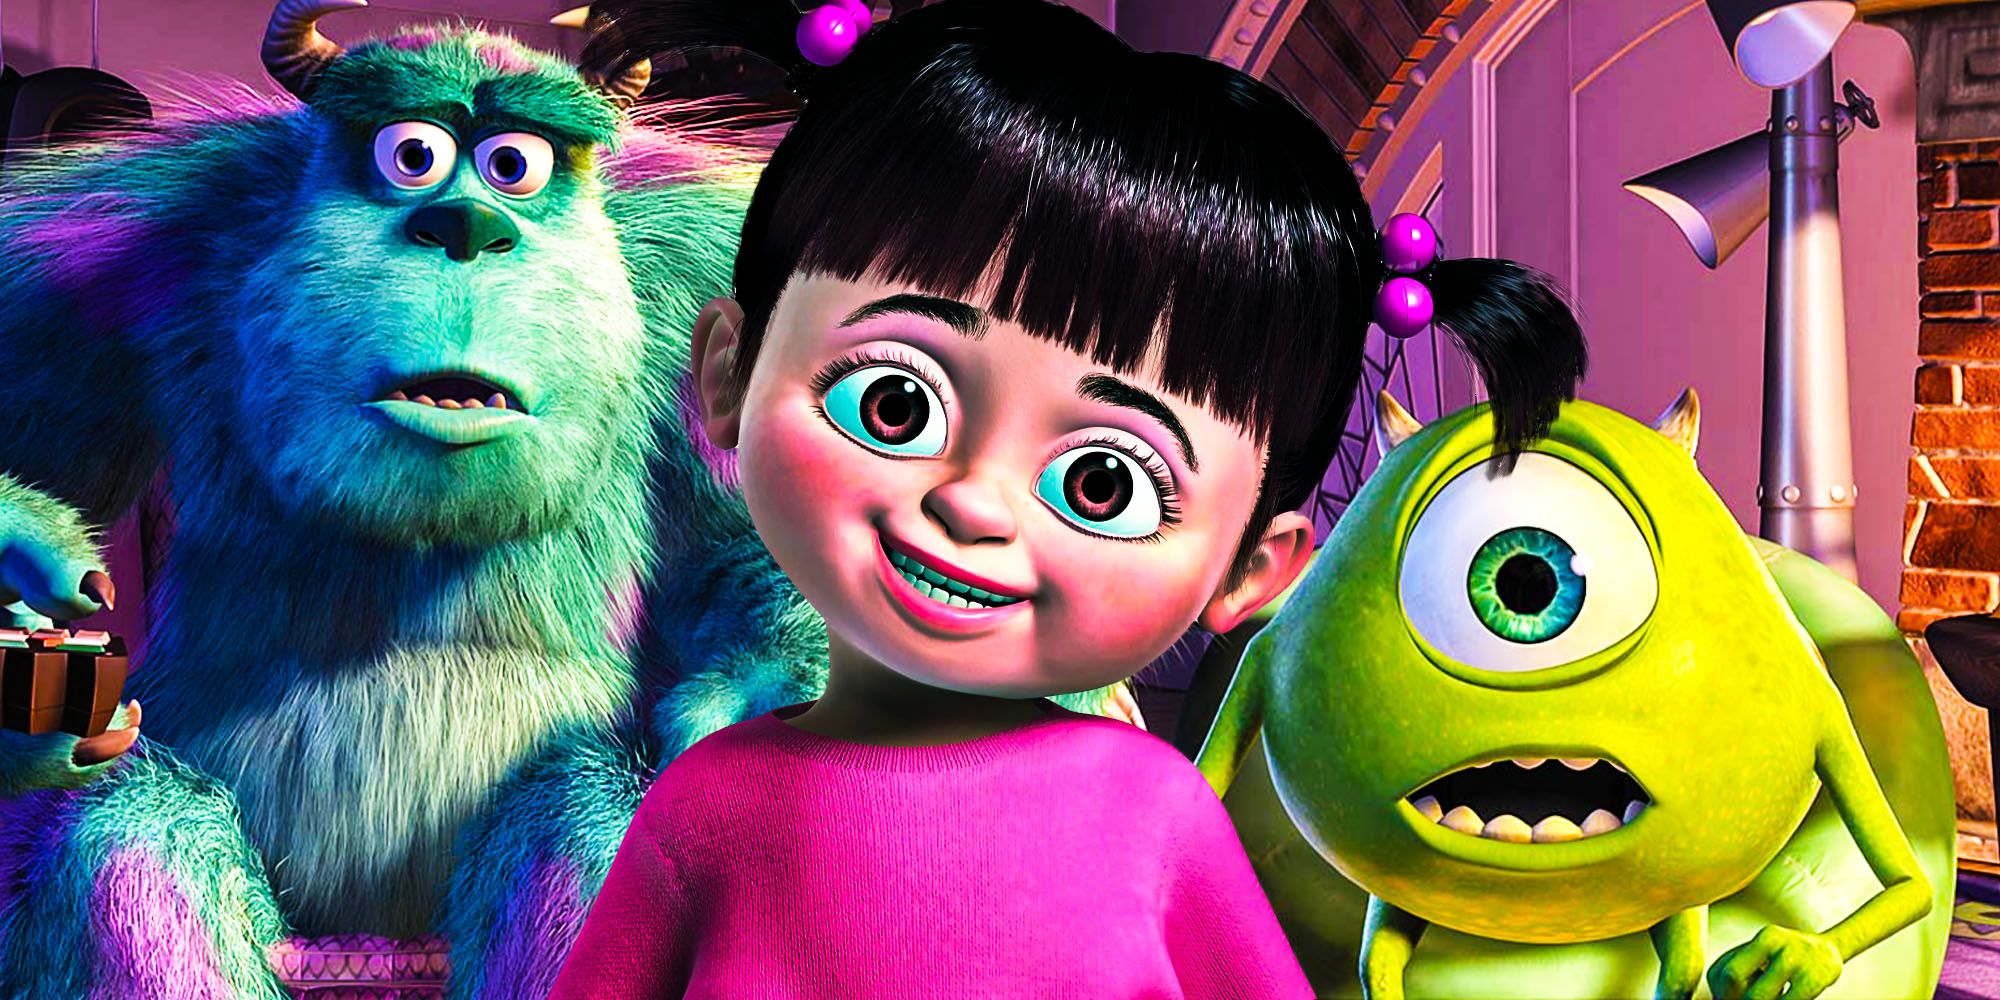 Monsters Inc: What Is Boo’s Real Name?